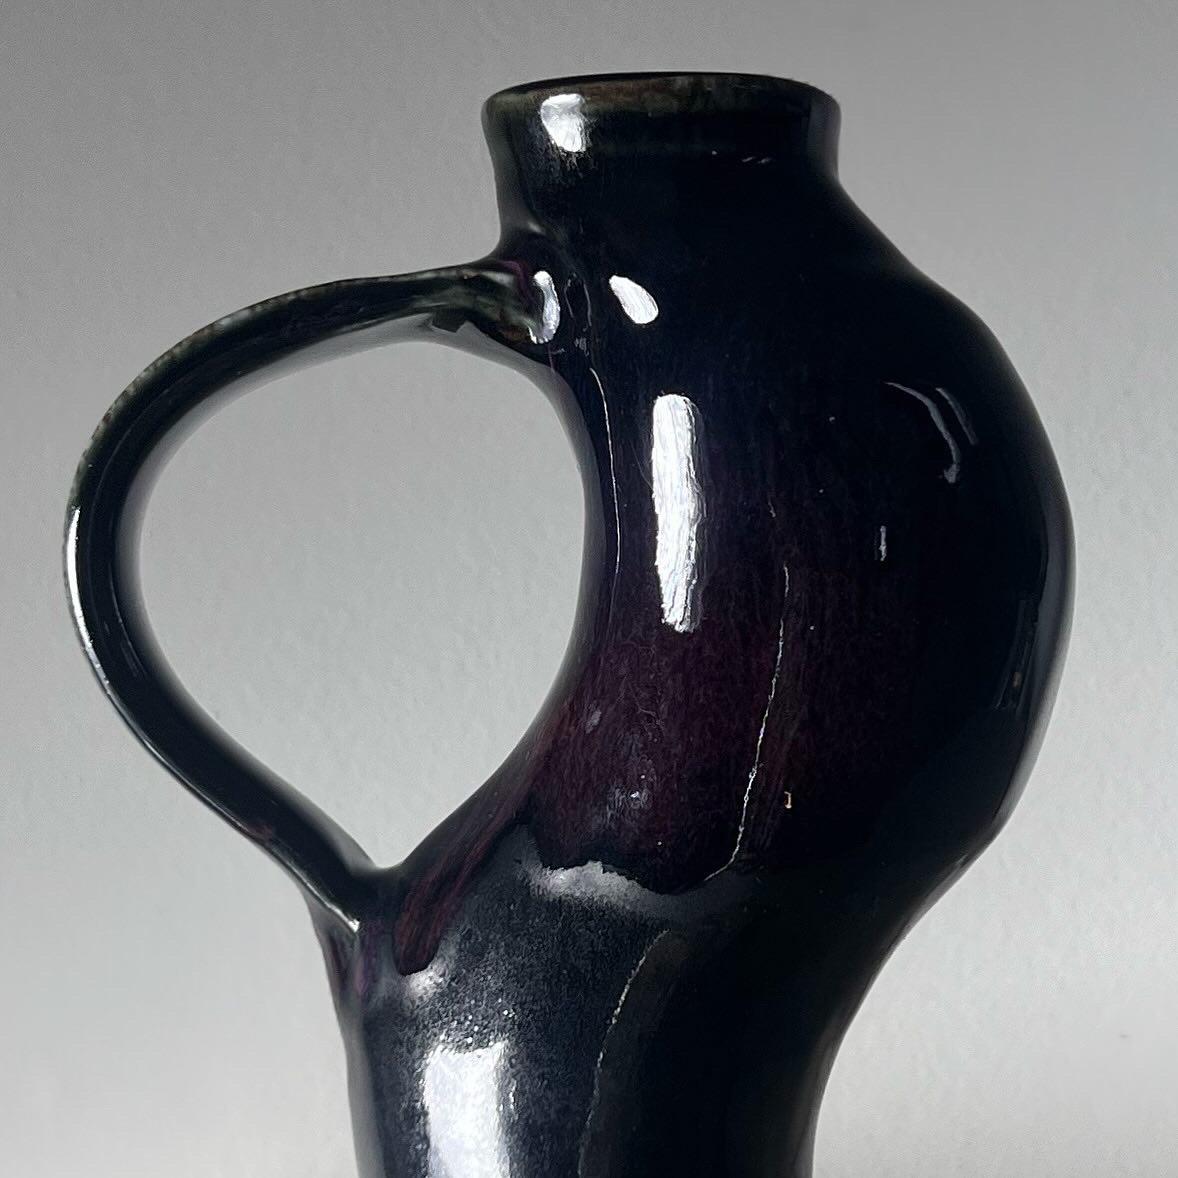 A unique studio art ceramic vessel featuring an unusual bombastic contrapposto stance with bulging belly, signed, early aughts. In deep licorice with hints of iridescent aubergine and lichen grace au glaze. Great condition. Pick up in central west